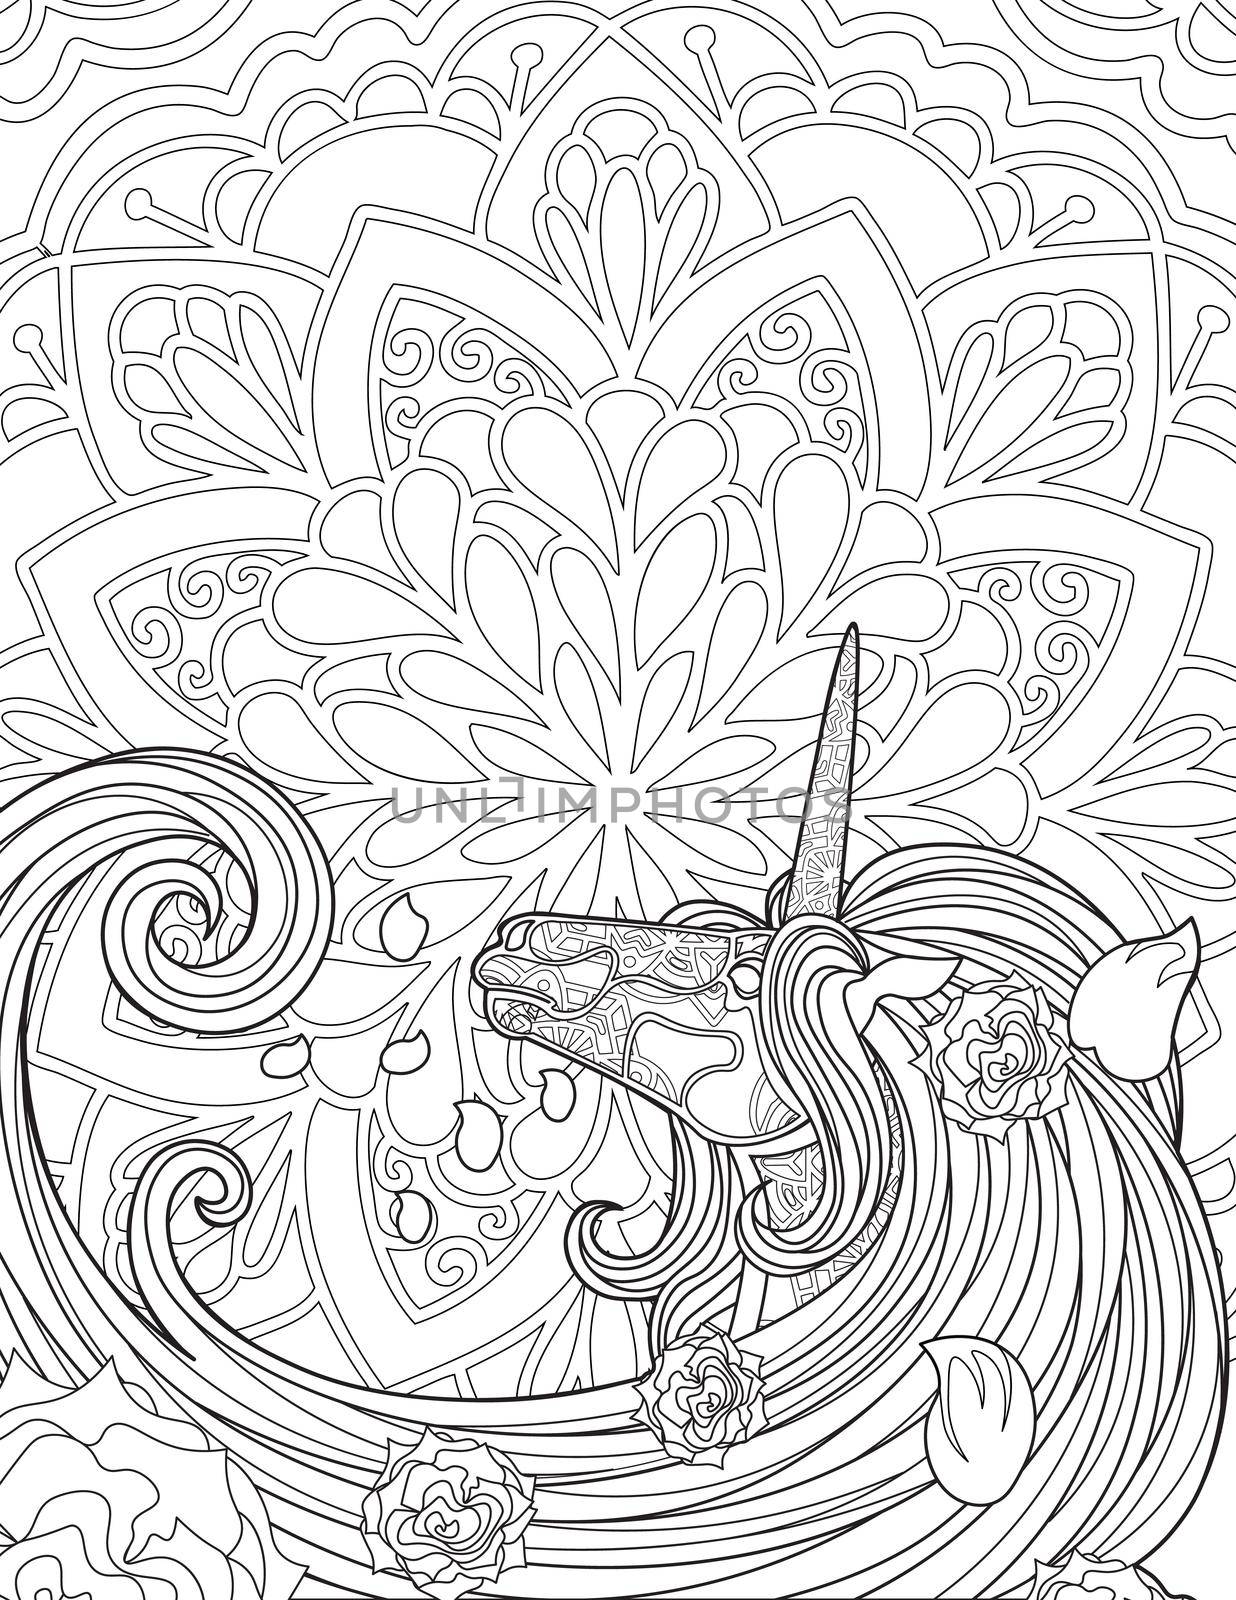 Unicorn Looking Back On A Flower Background With Flowers Over Mane Line Drawing. Mythical Horned Horse Looks Behind Blooming Backdrop Coloring Book Page. by nialowwa